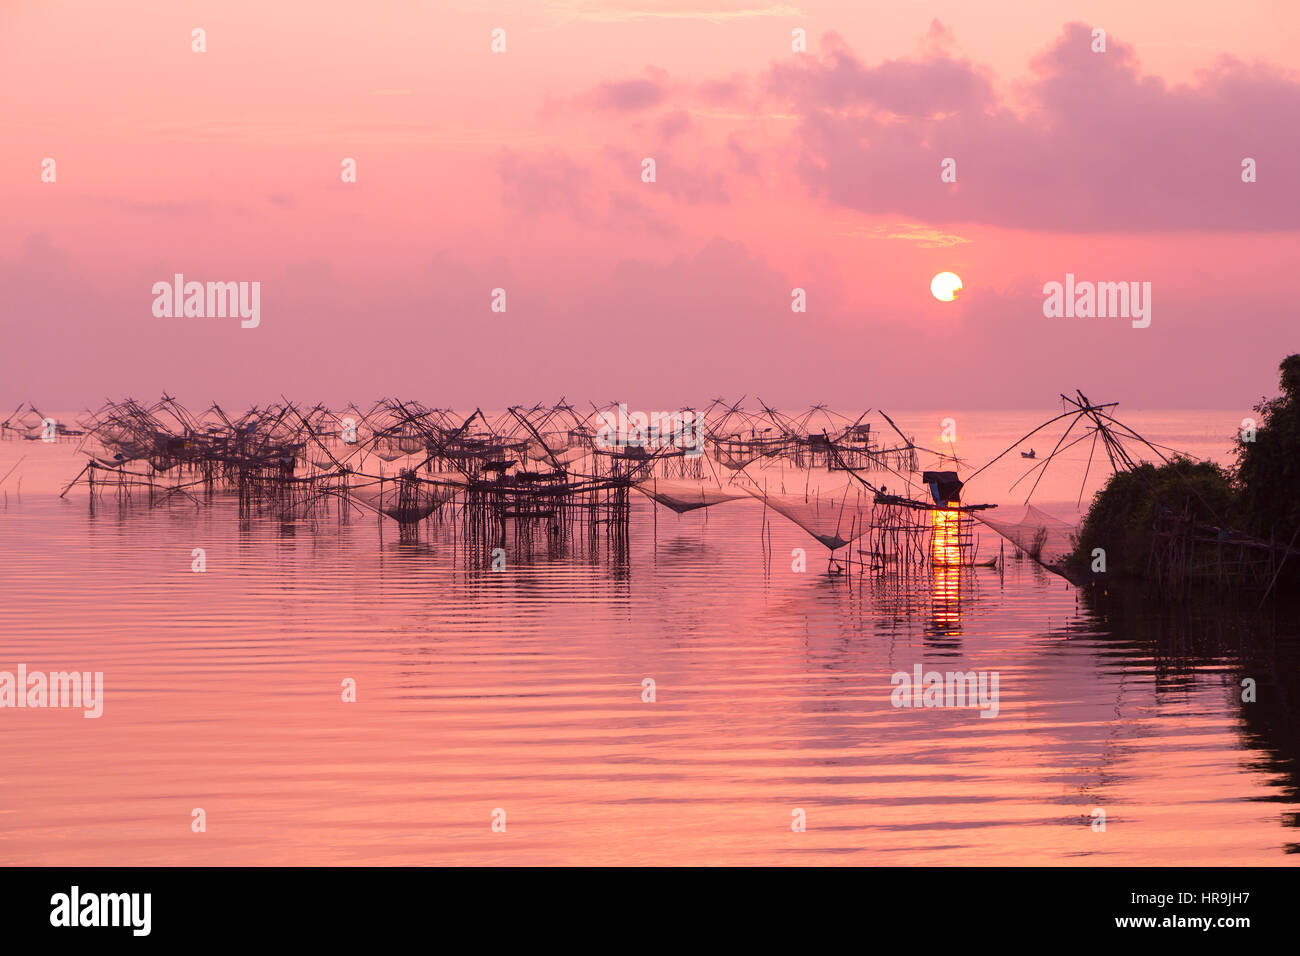 Fishing nets in the lake in Southern part of Thailand in pink warm morning light Stock Photo